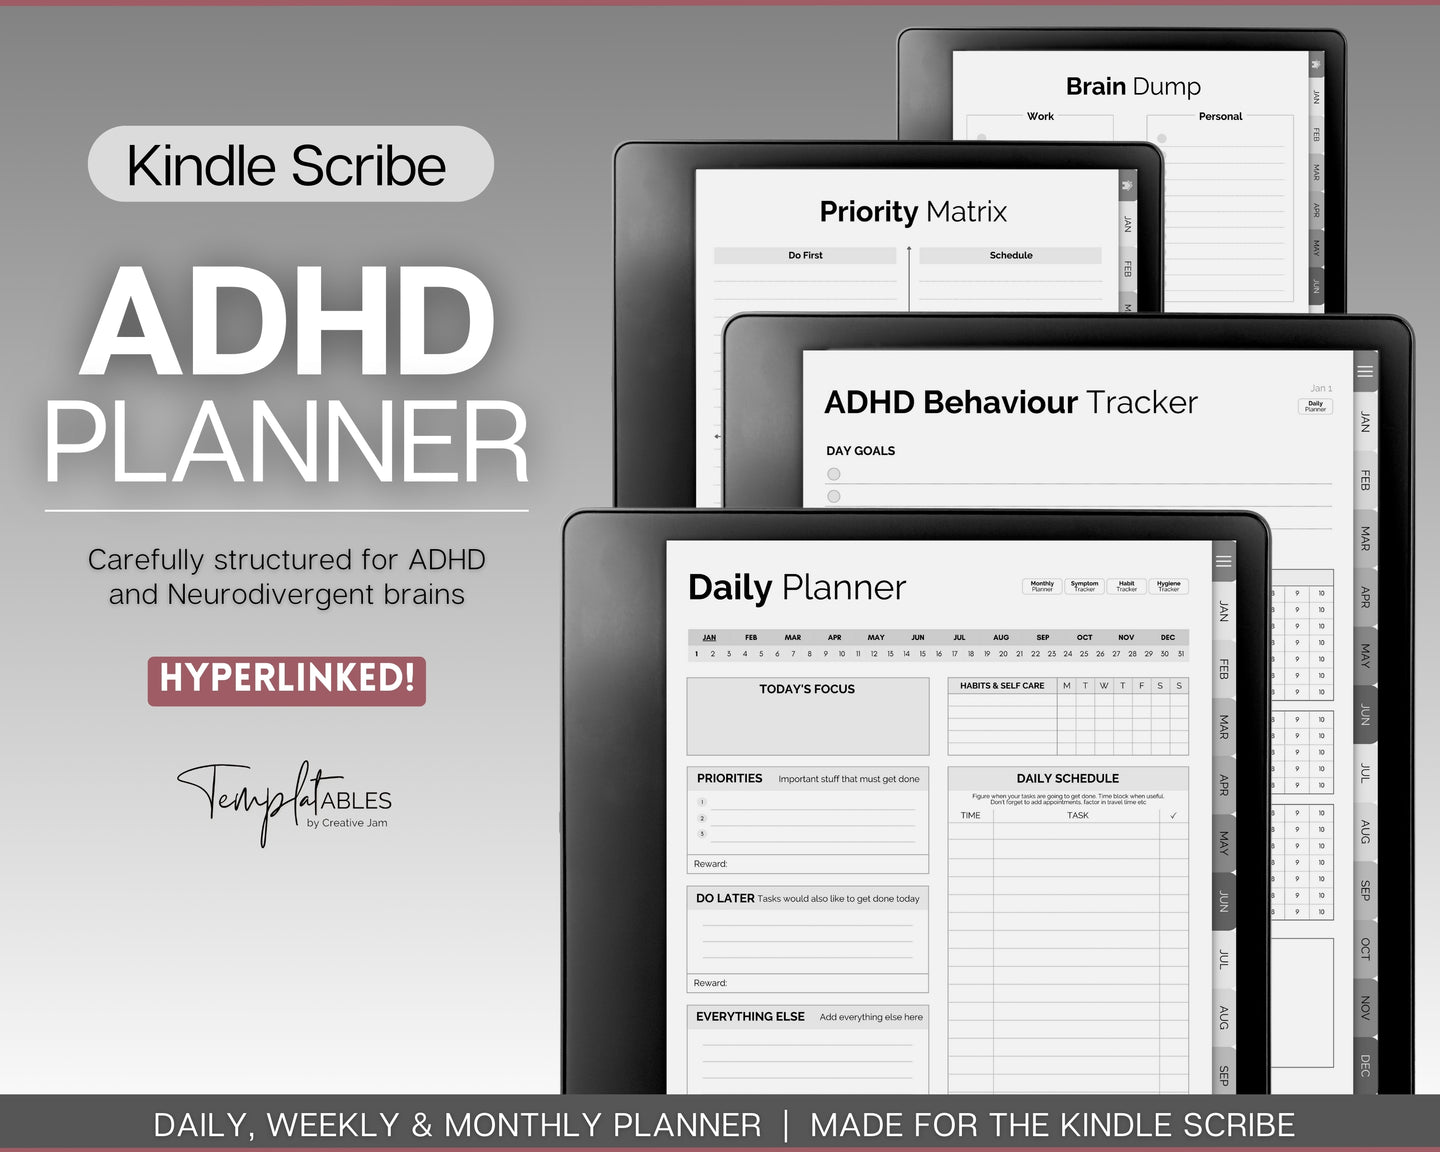 Kindle Scribe Digital ADHD planner | Daily Planner for Neurodivergent Adults | Includes Brain Dump Template & To Do List